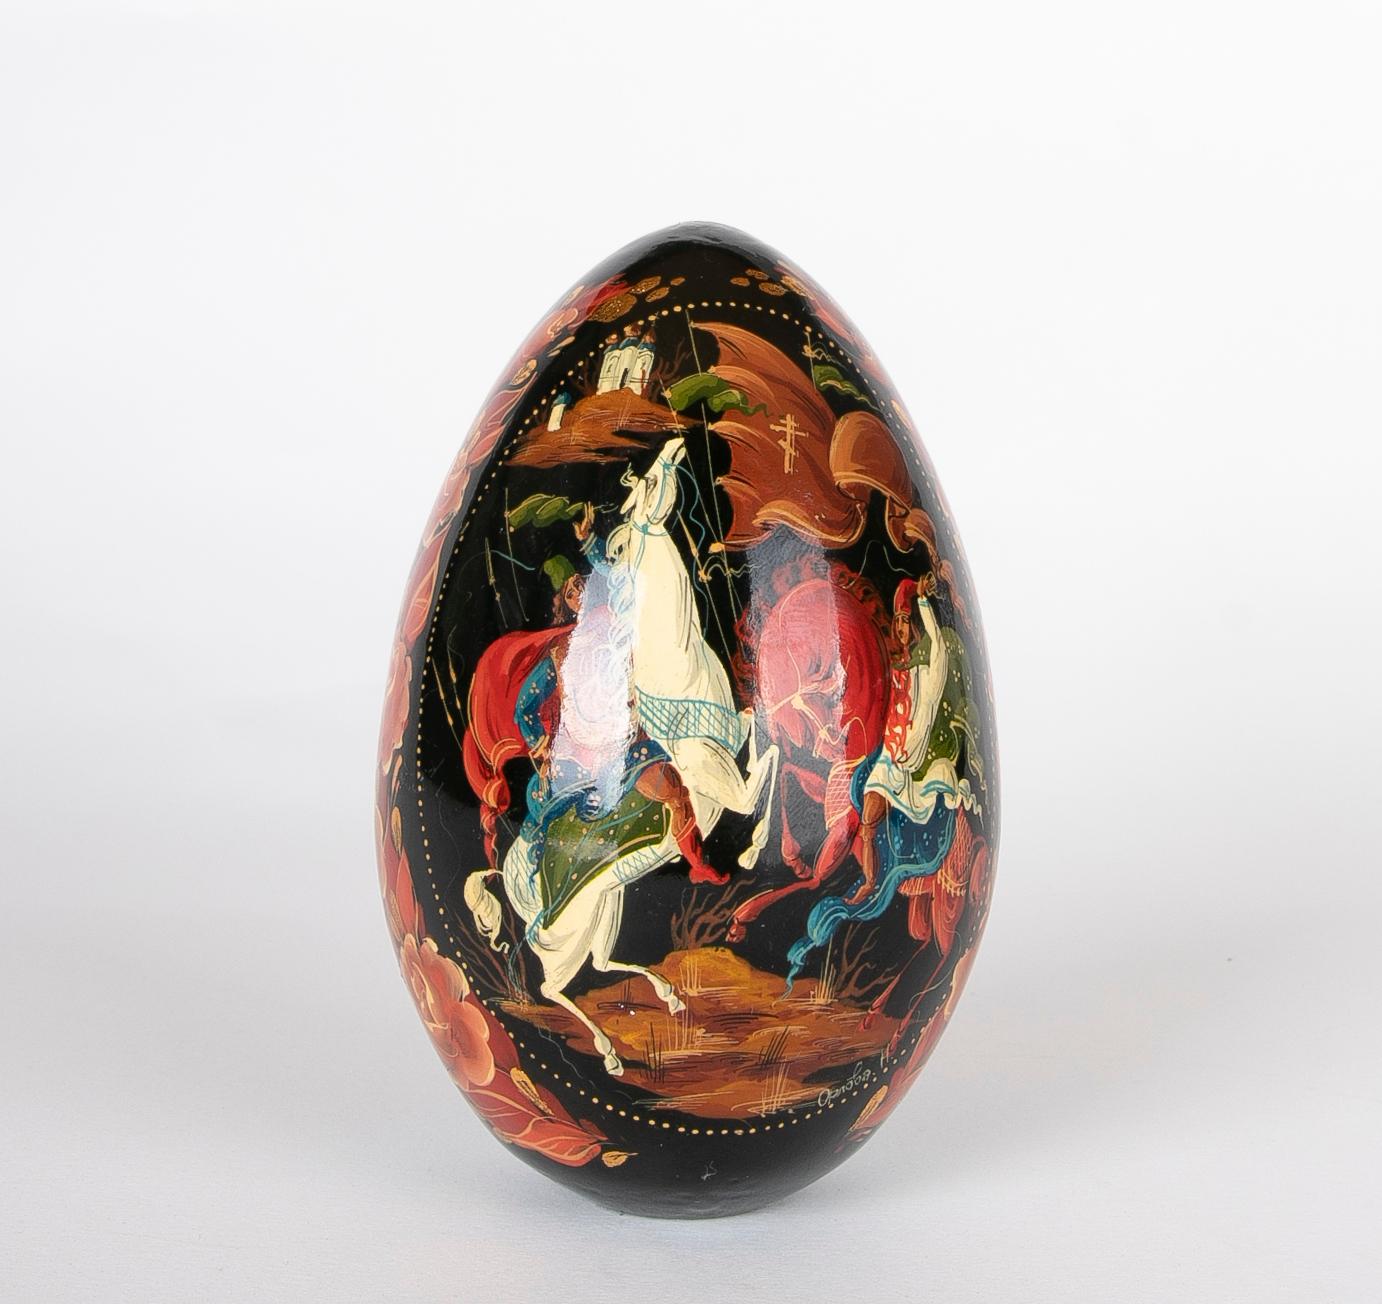 Hand-Painted Paper Mache Egg, Signed and Dated
